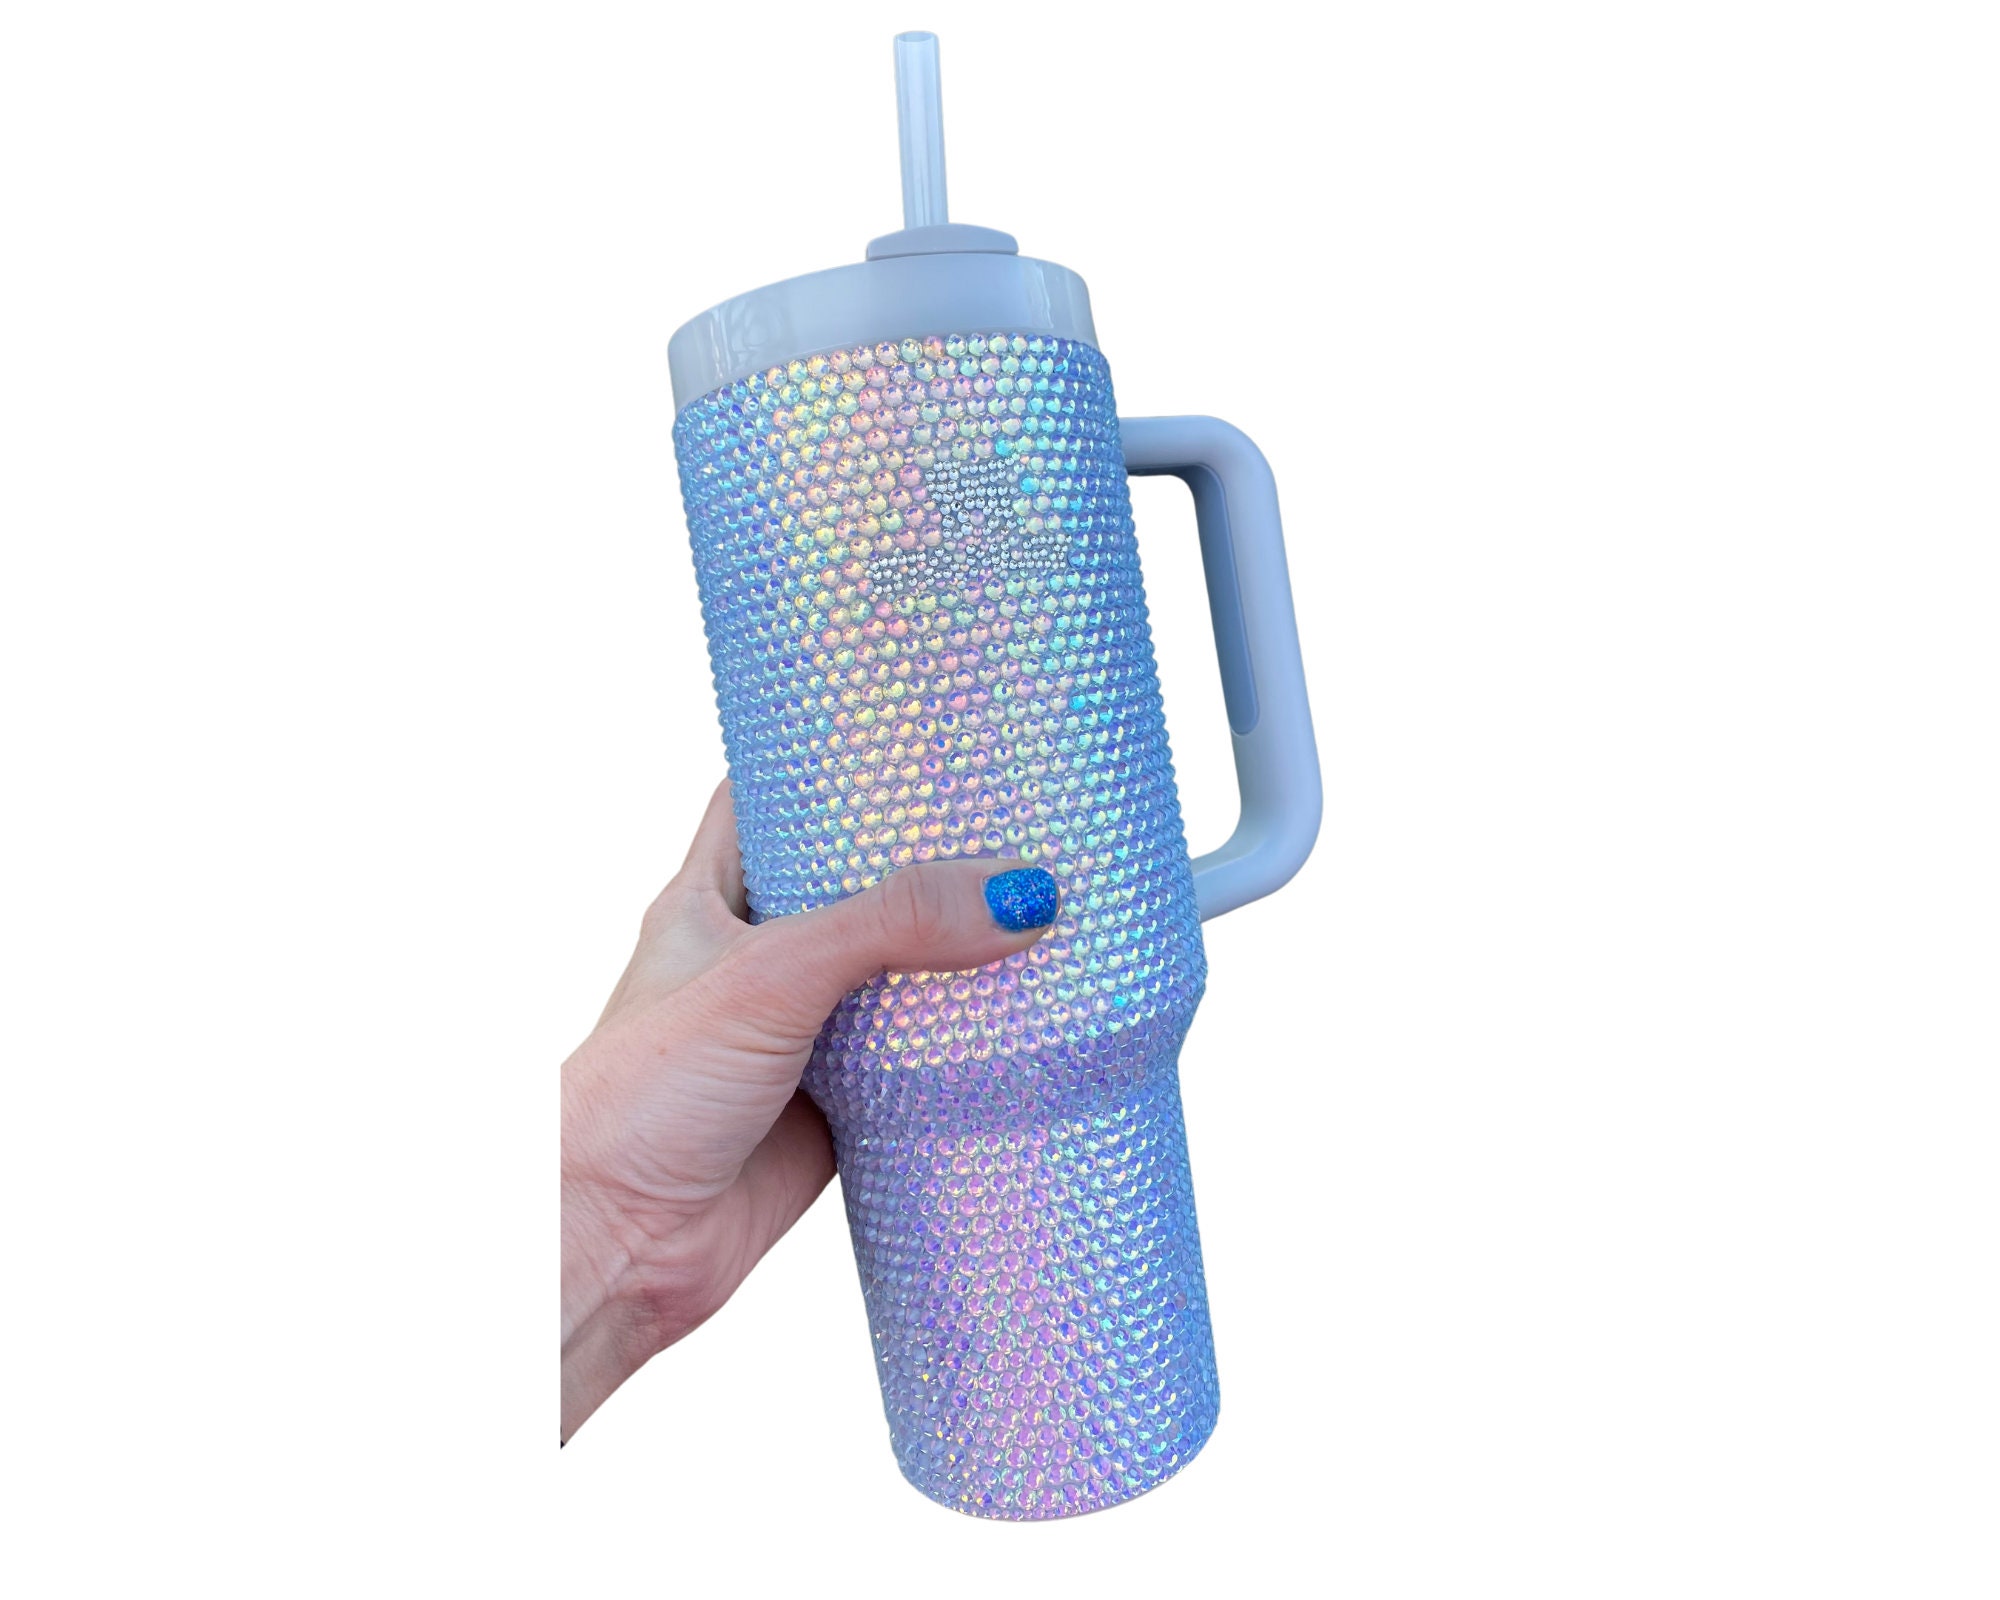 Stanley Tumbler Straw Cup Topper Drink Your Effing Water Blue Glitter –  Cutthroat's Great Wood